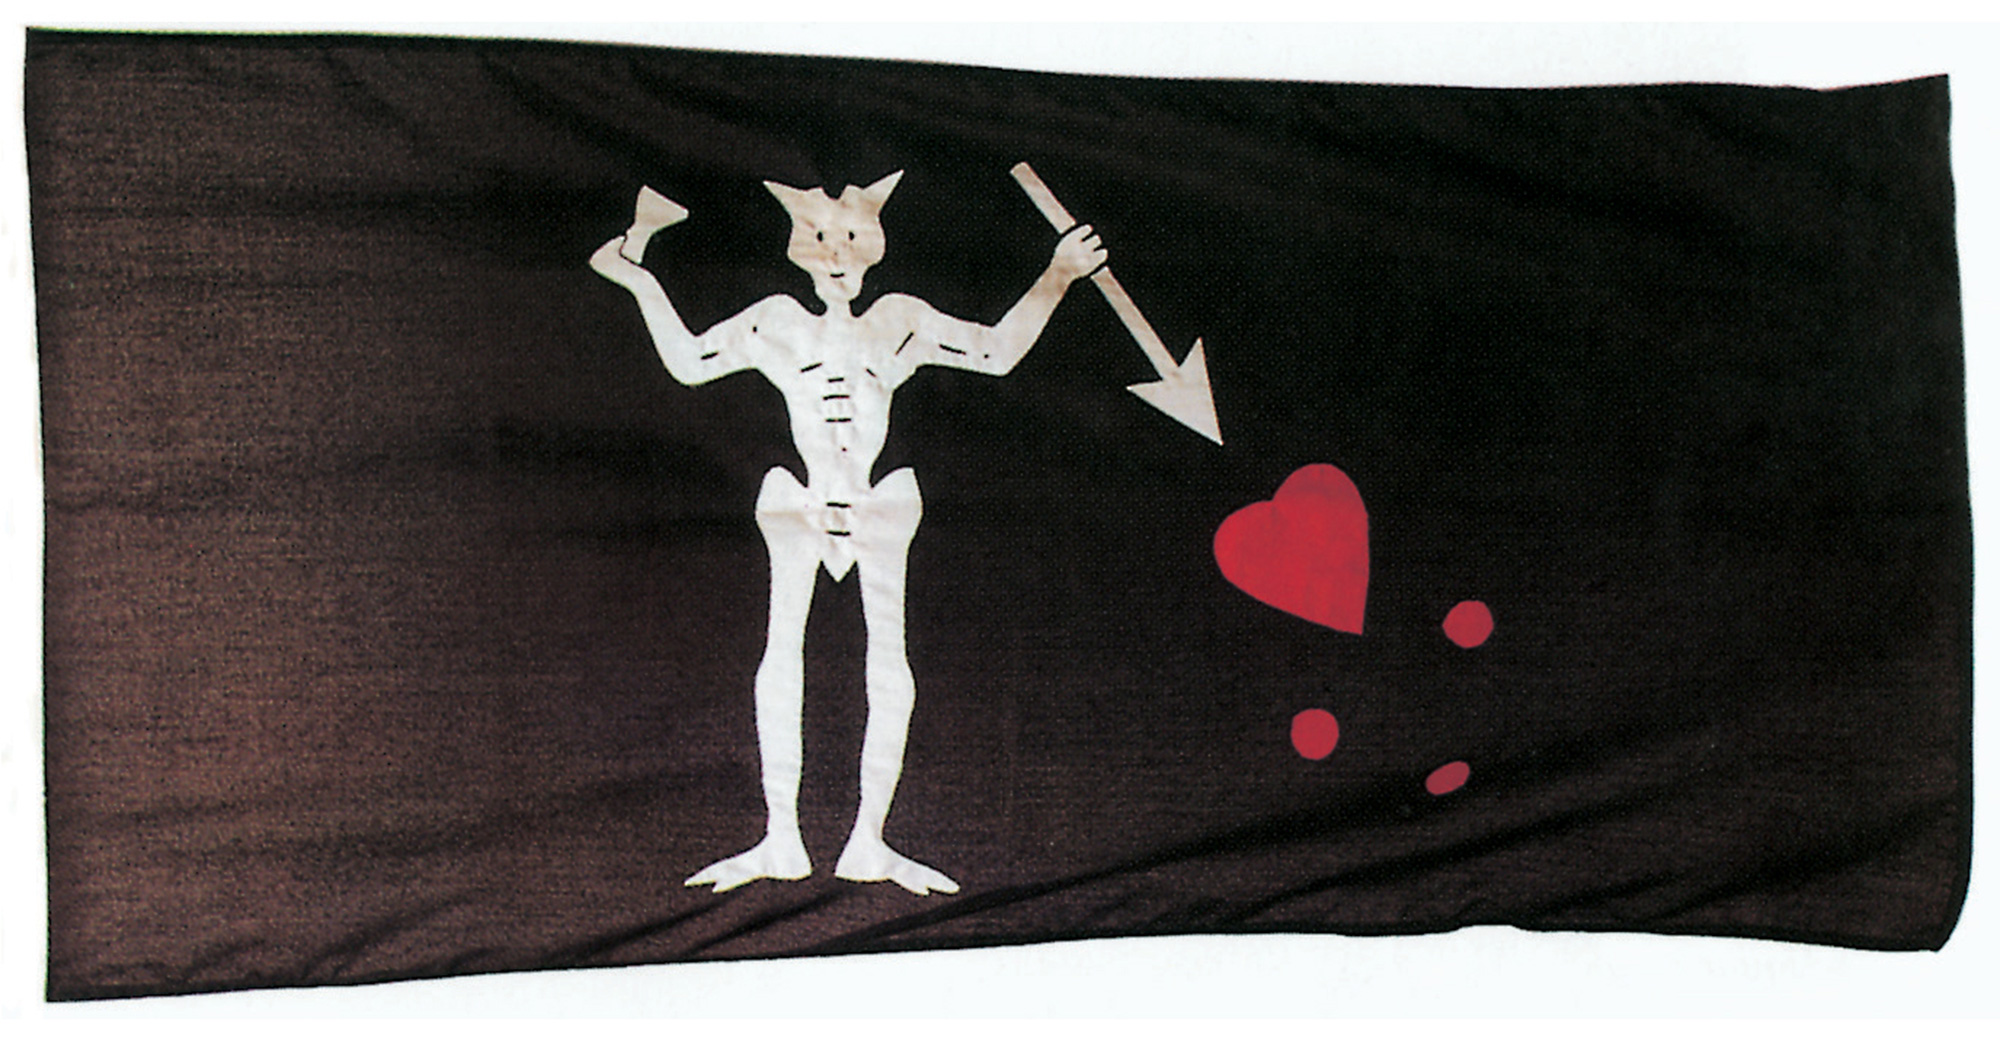 A photograph of a pirate flag bearing the motif of the 